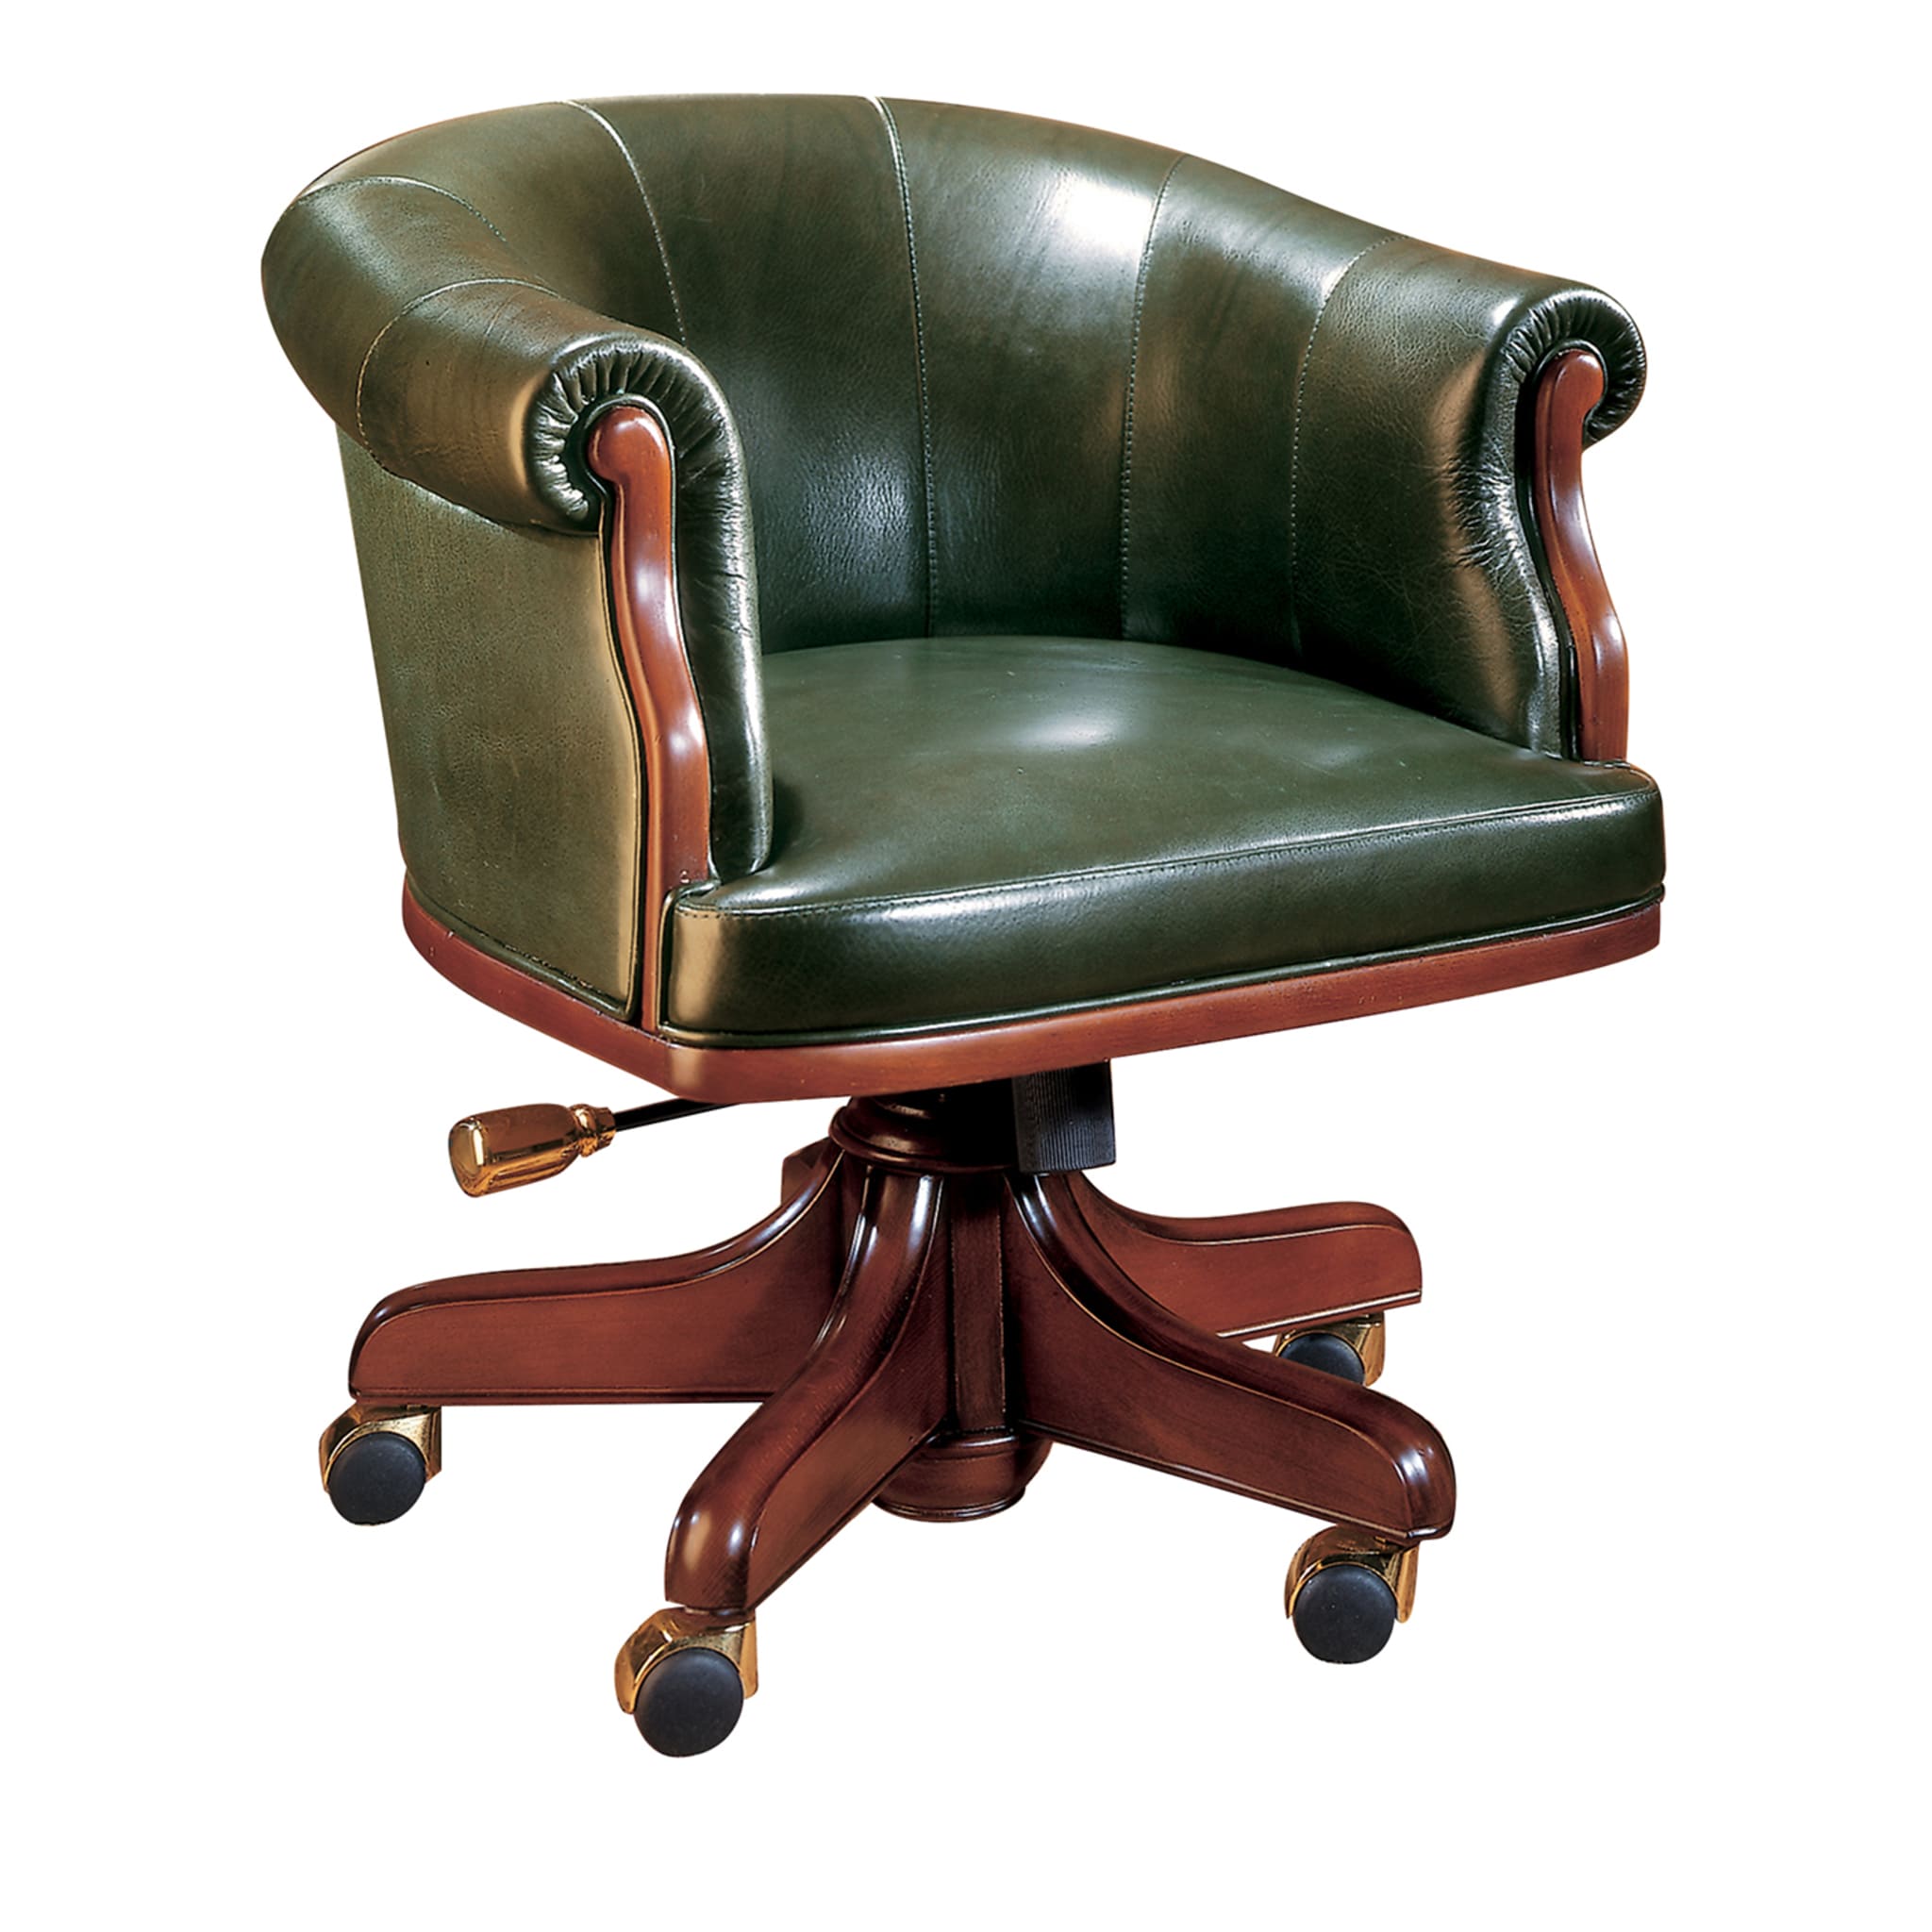 Green Leather Armchair - Main view